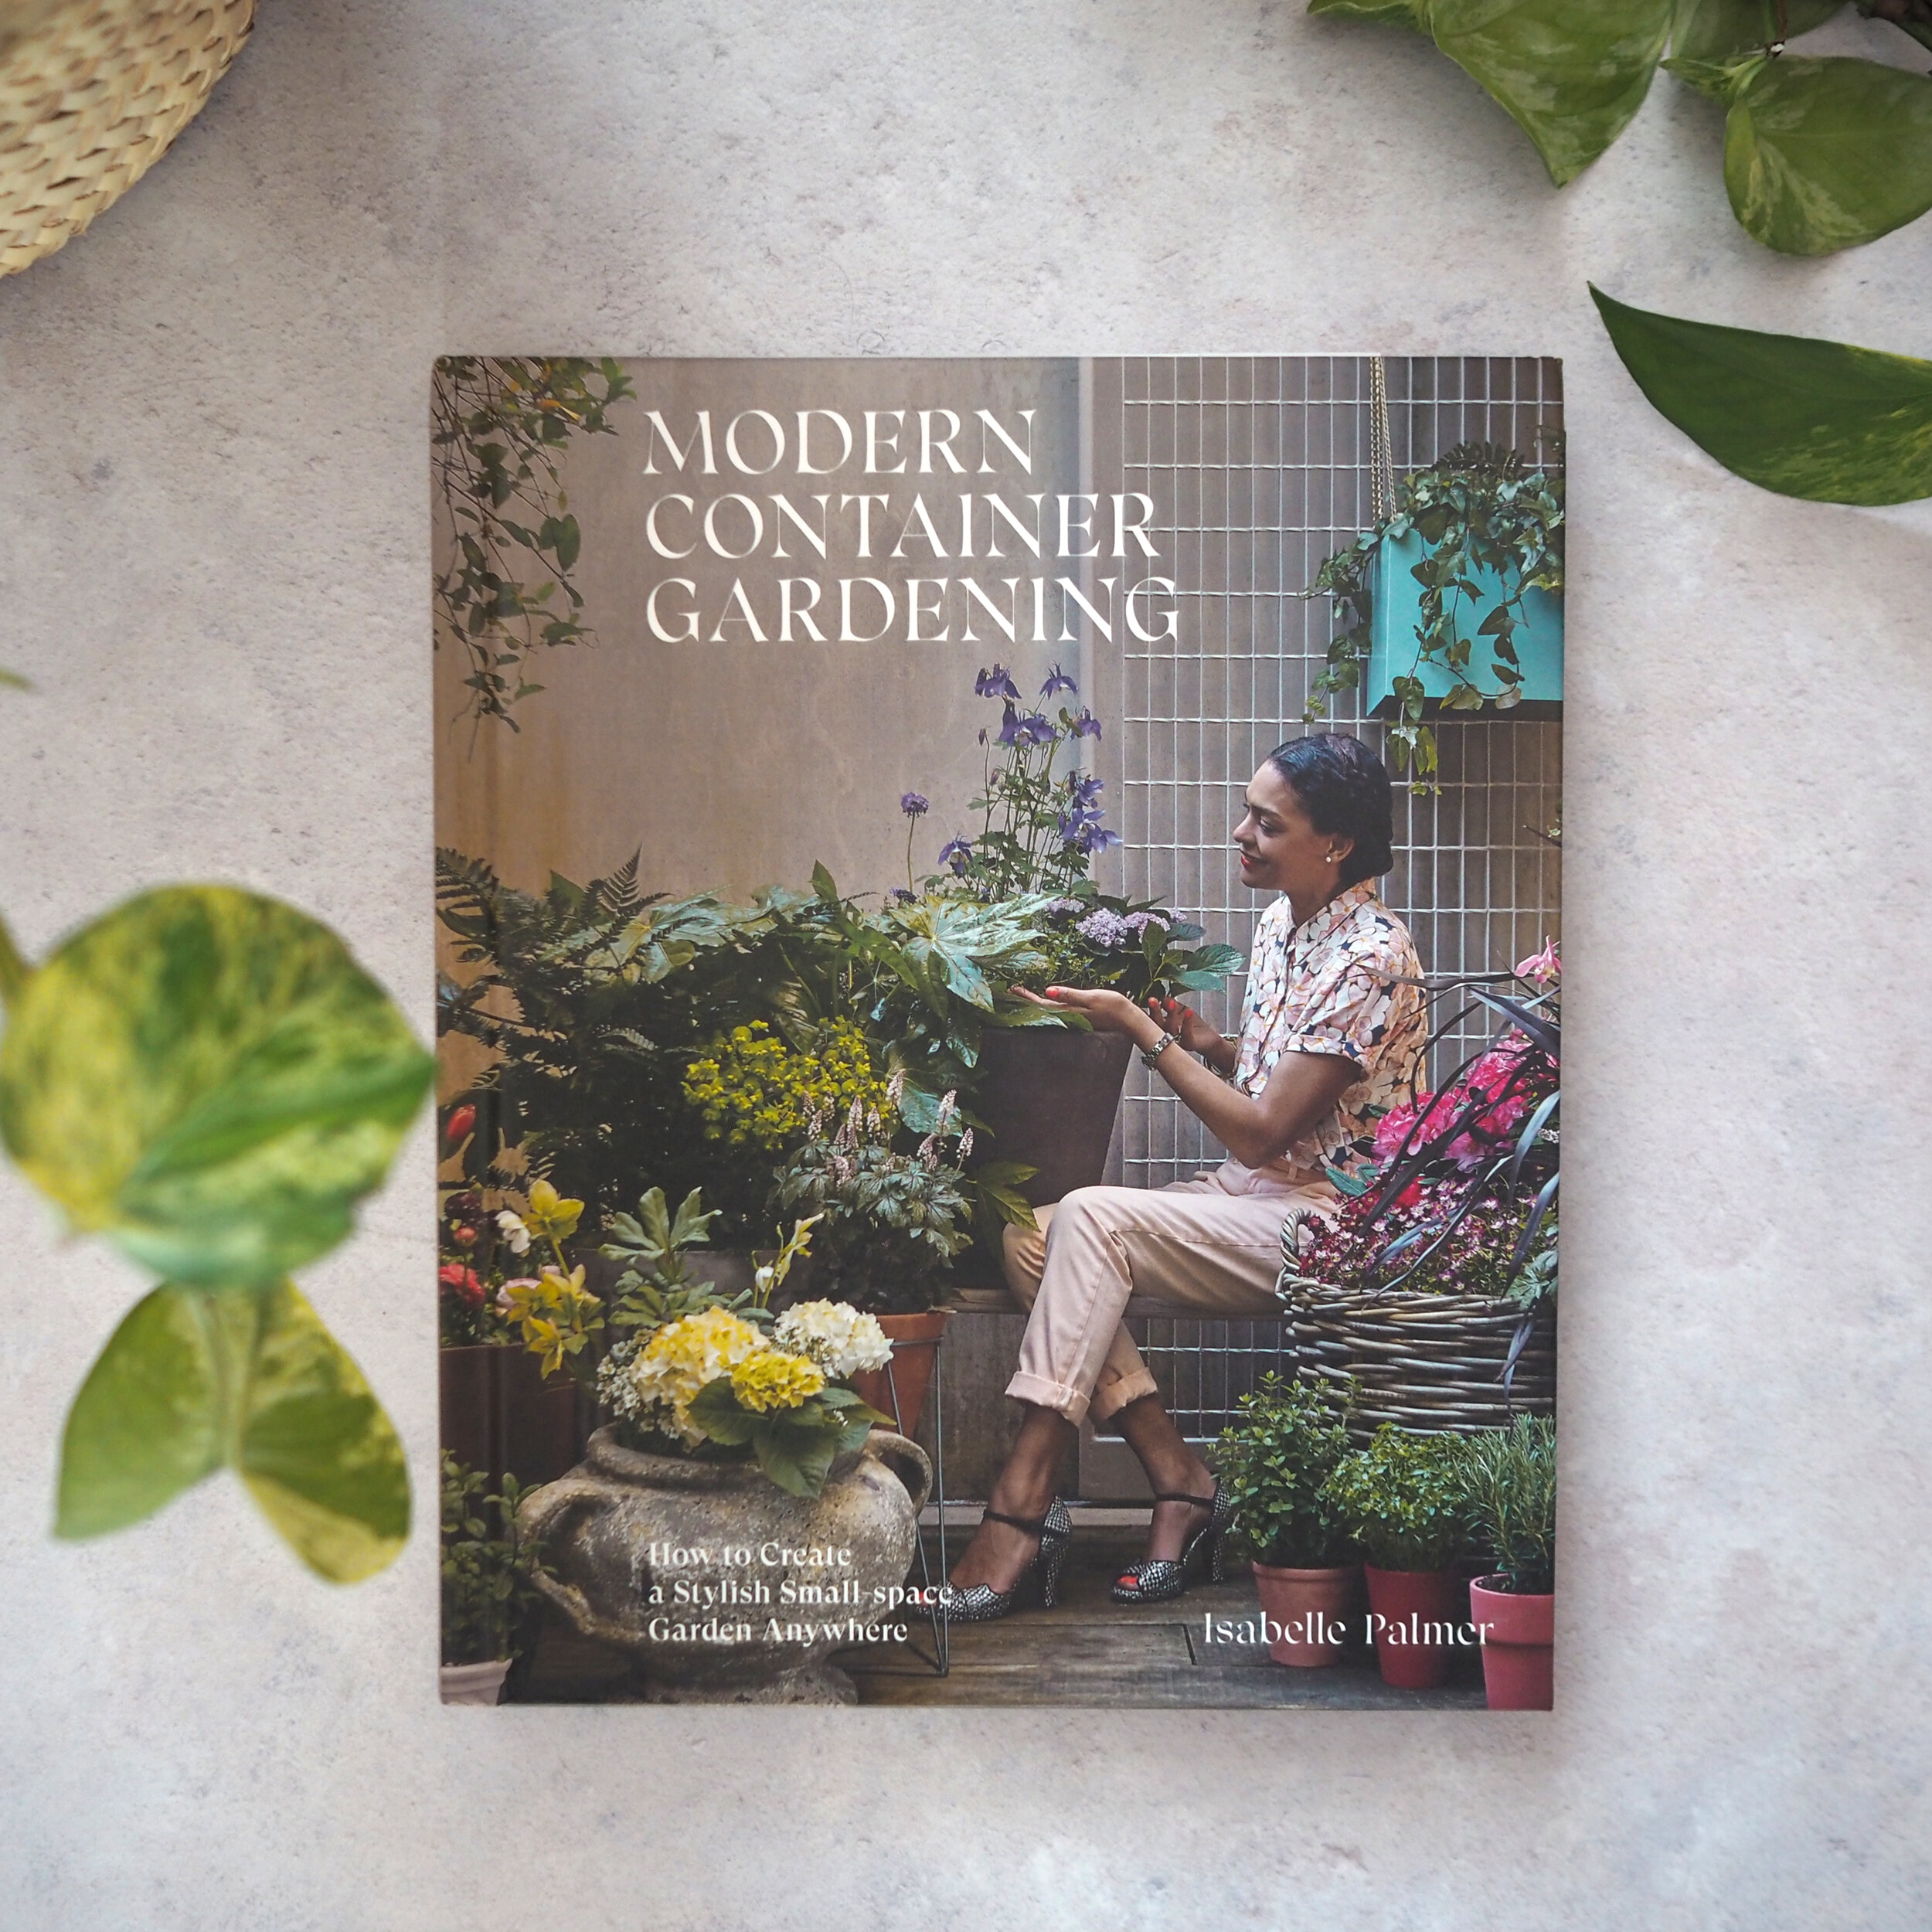 91 is reading... Modern Container Gardening by Isabelle Palmer